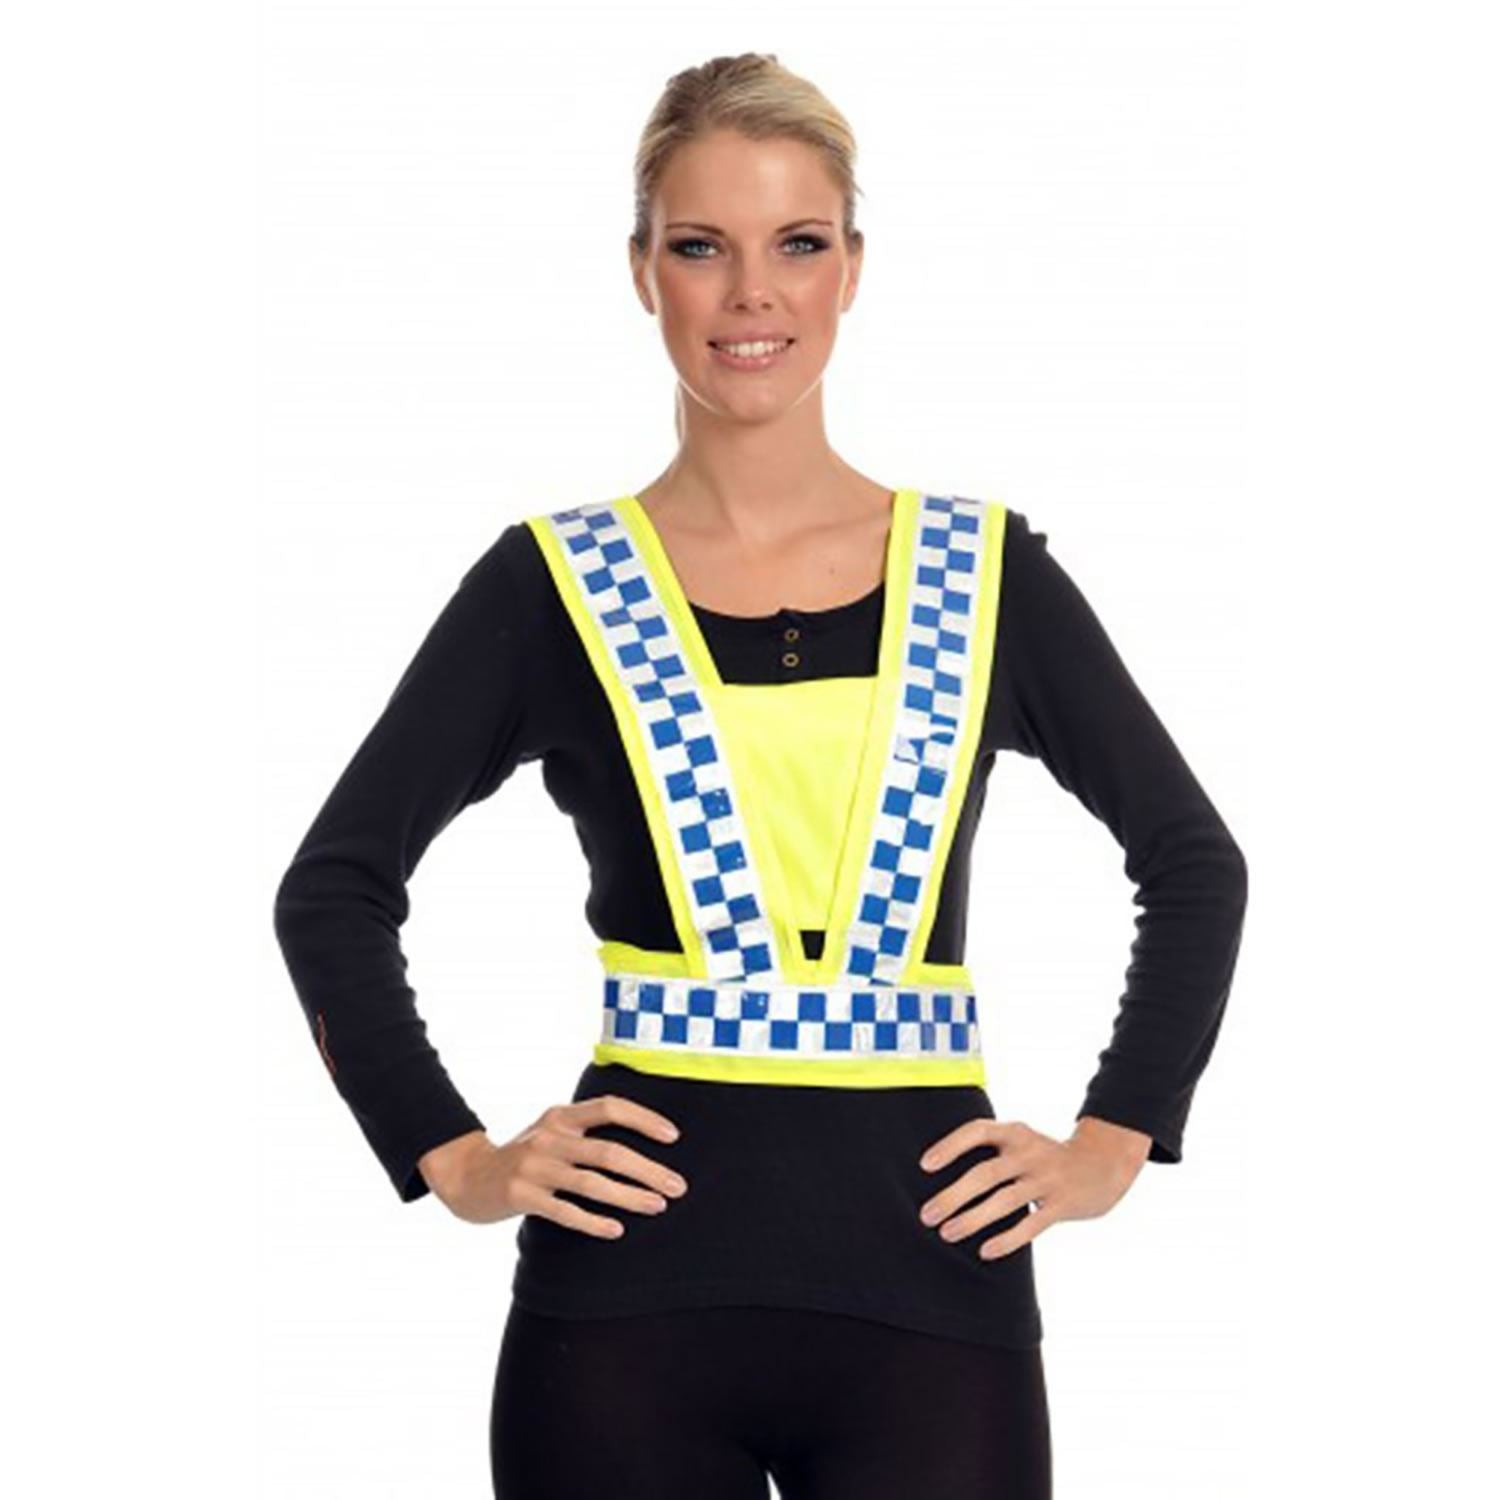 Equisafety Polite Hi-Vis Adjustable Body Harness - Just Horse Riders